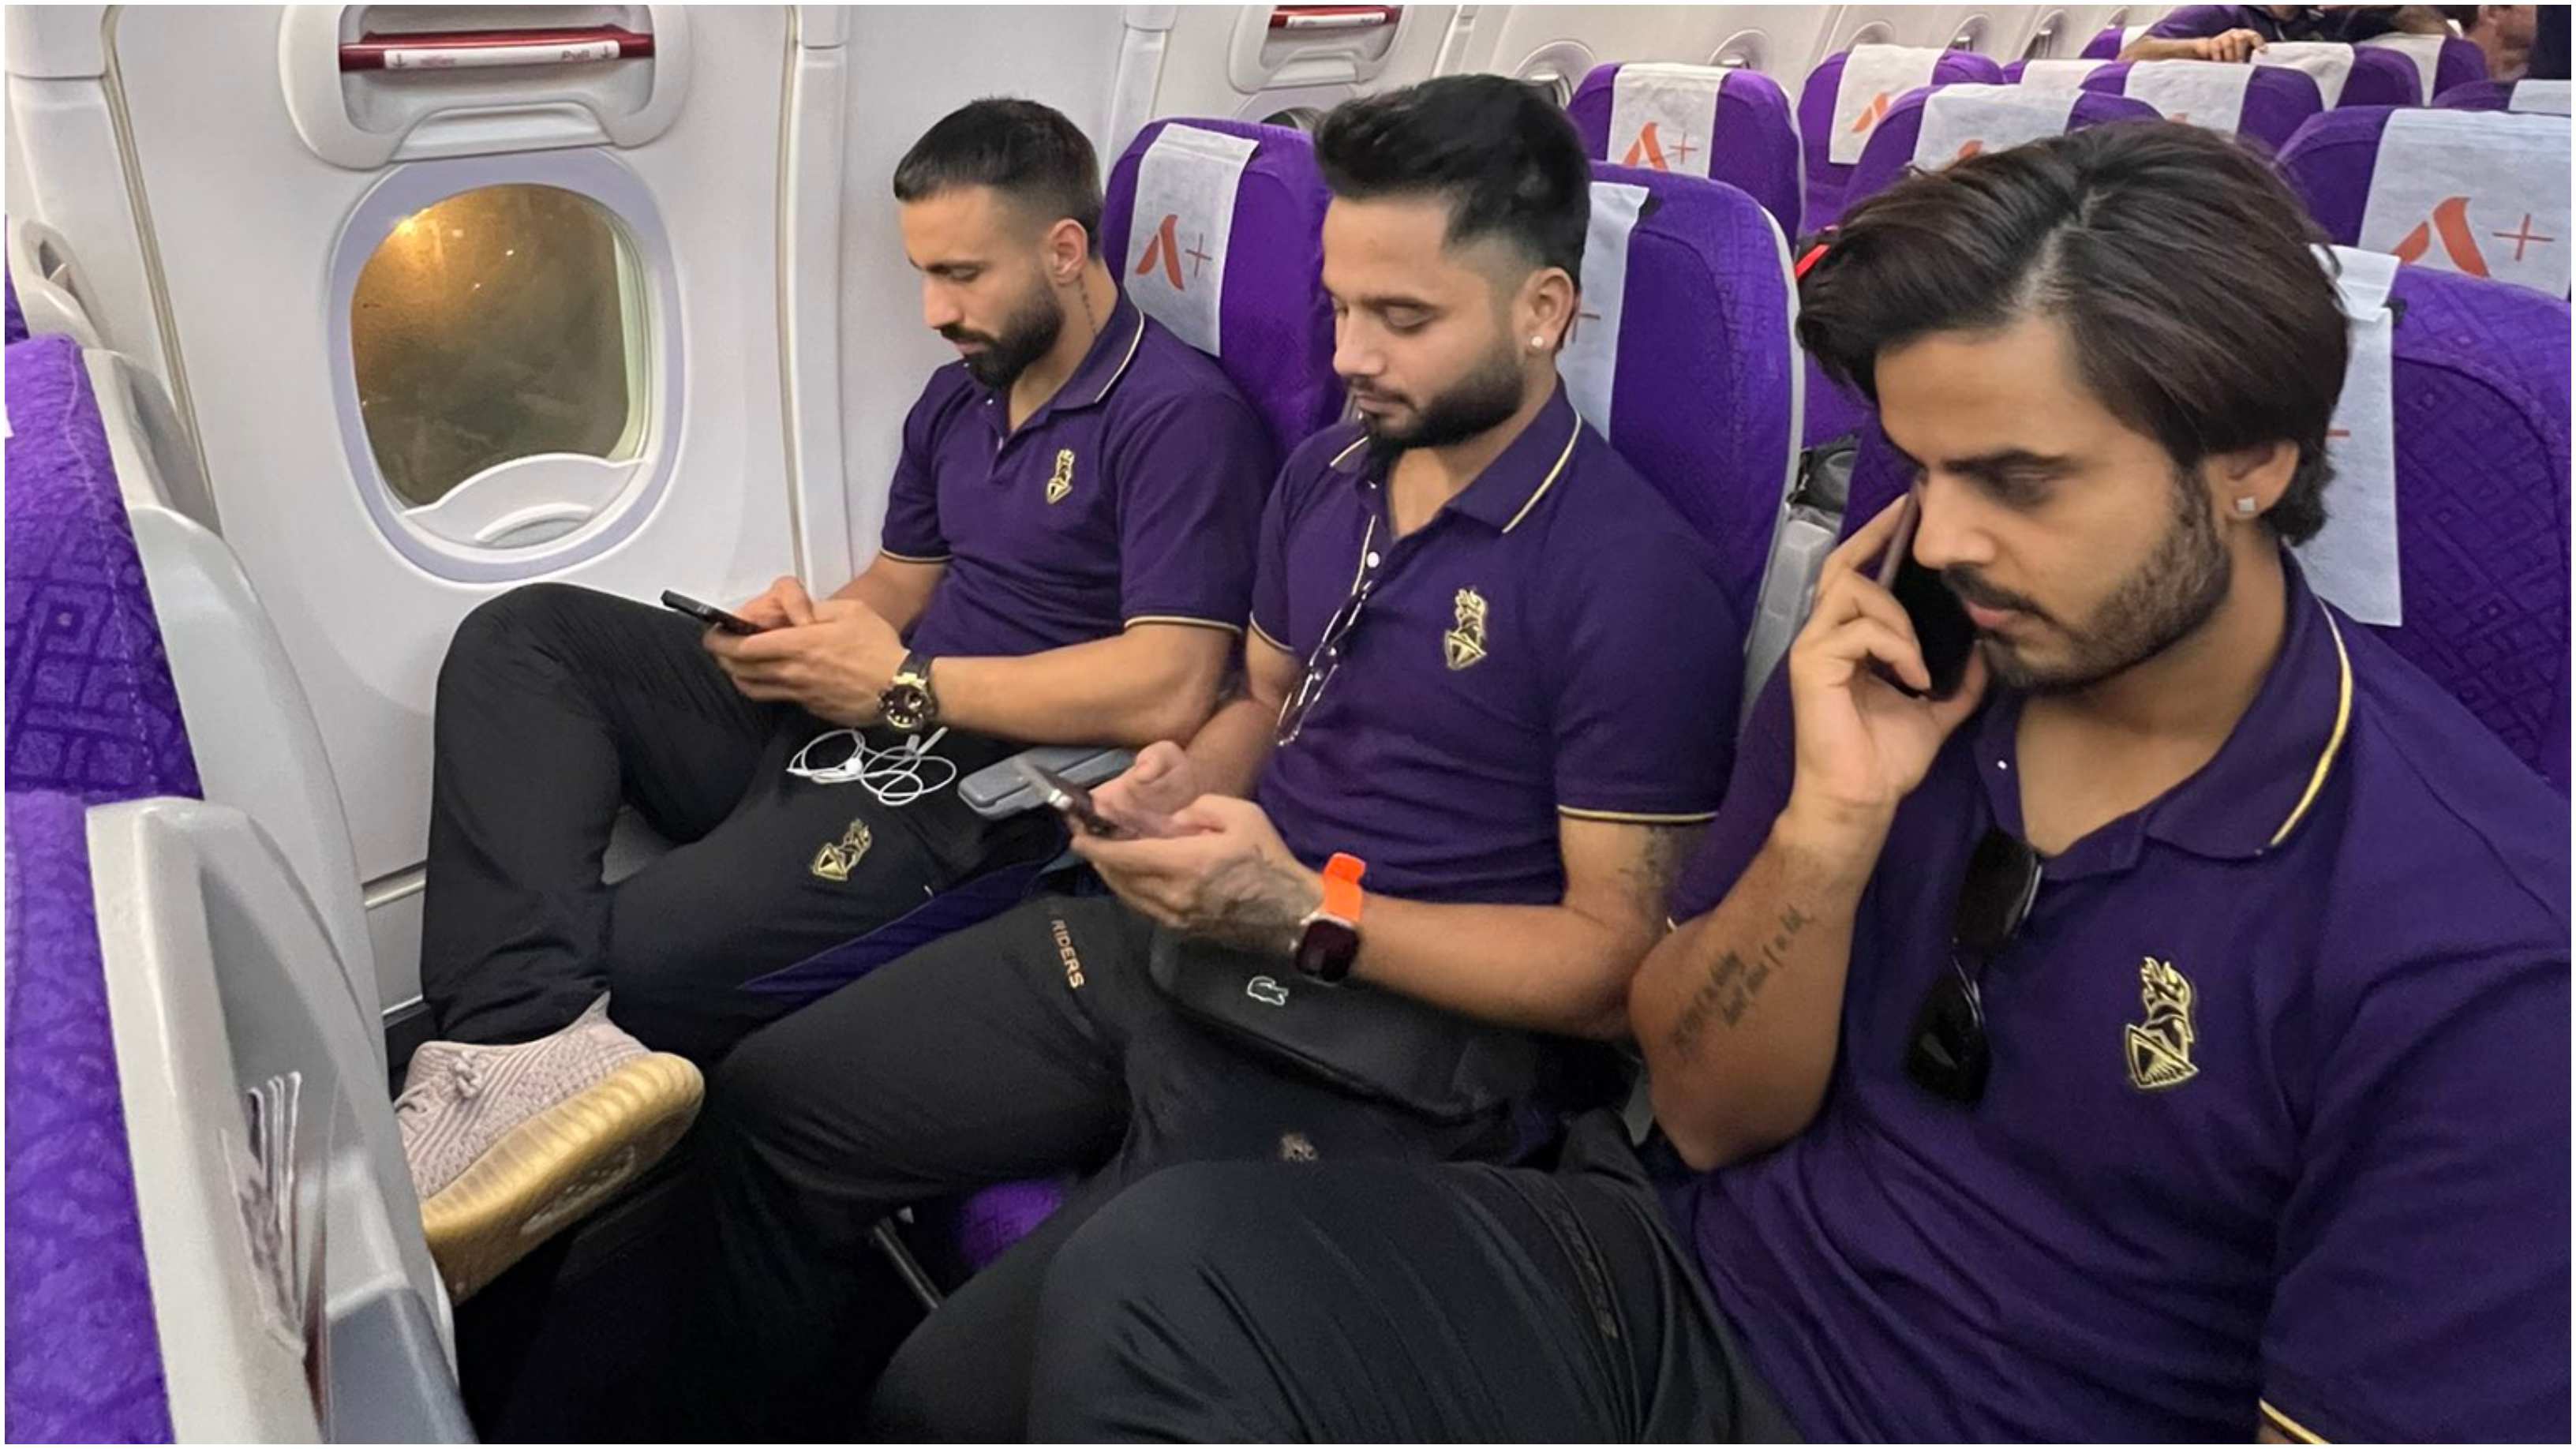 KKR's flight could not land in Kolkata due to bad weather | KKR/X